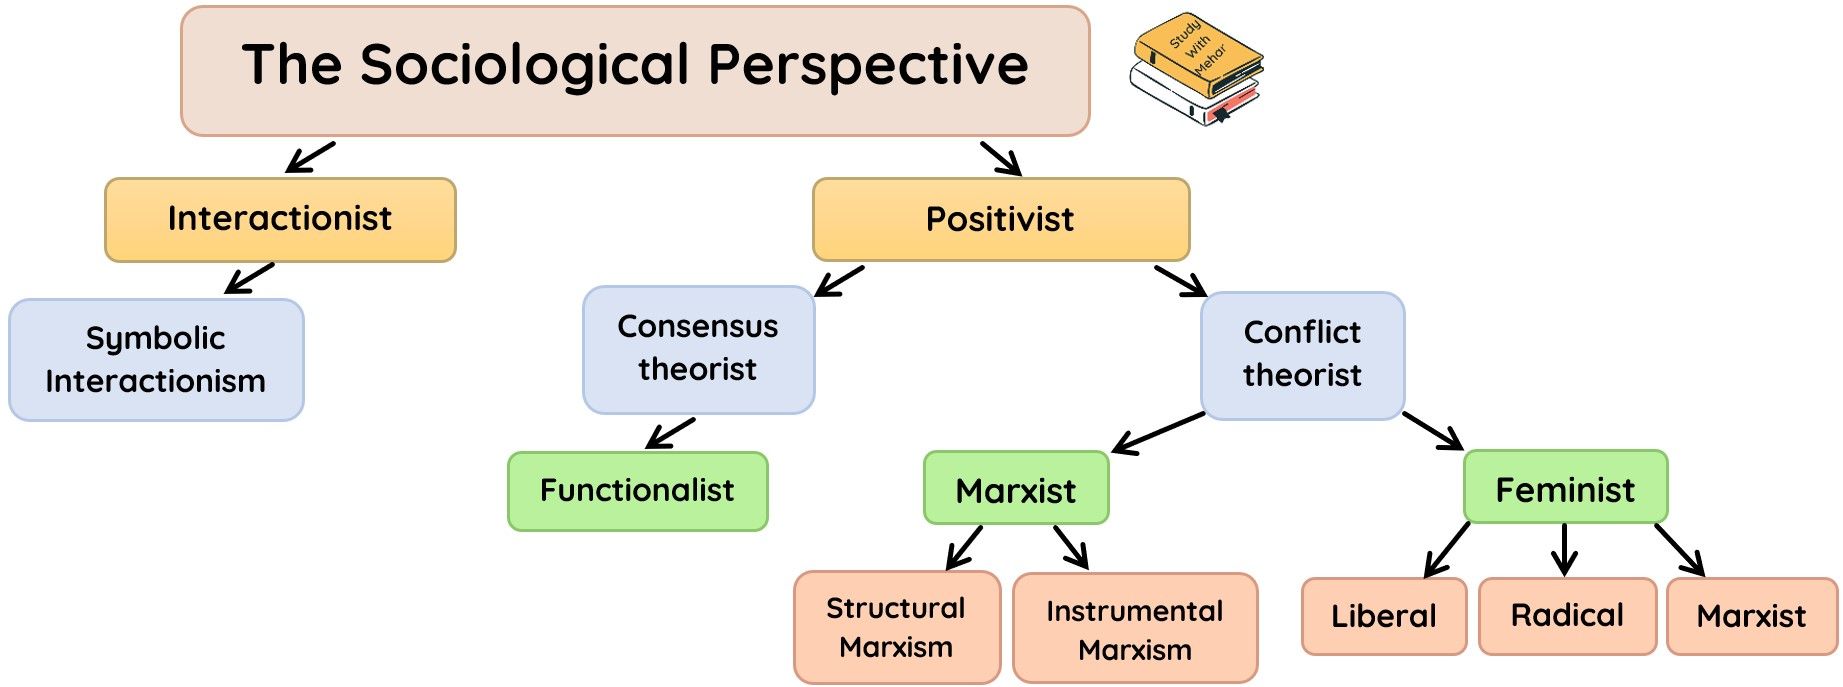 sociological perspective case study